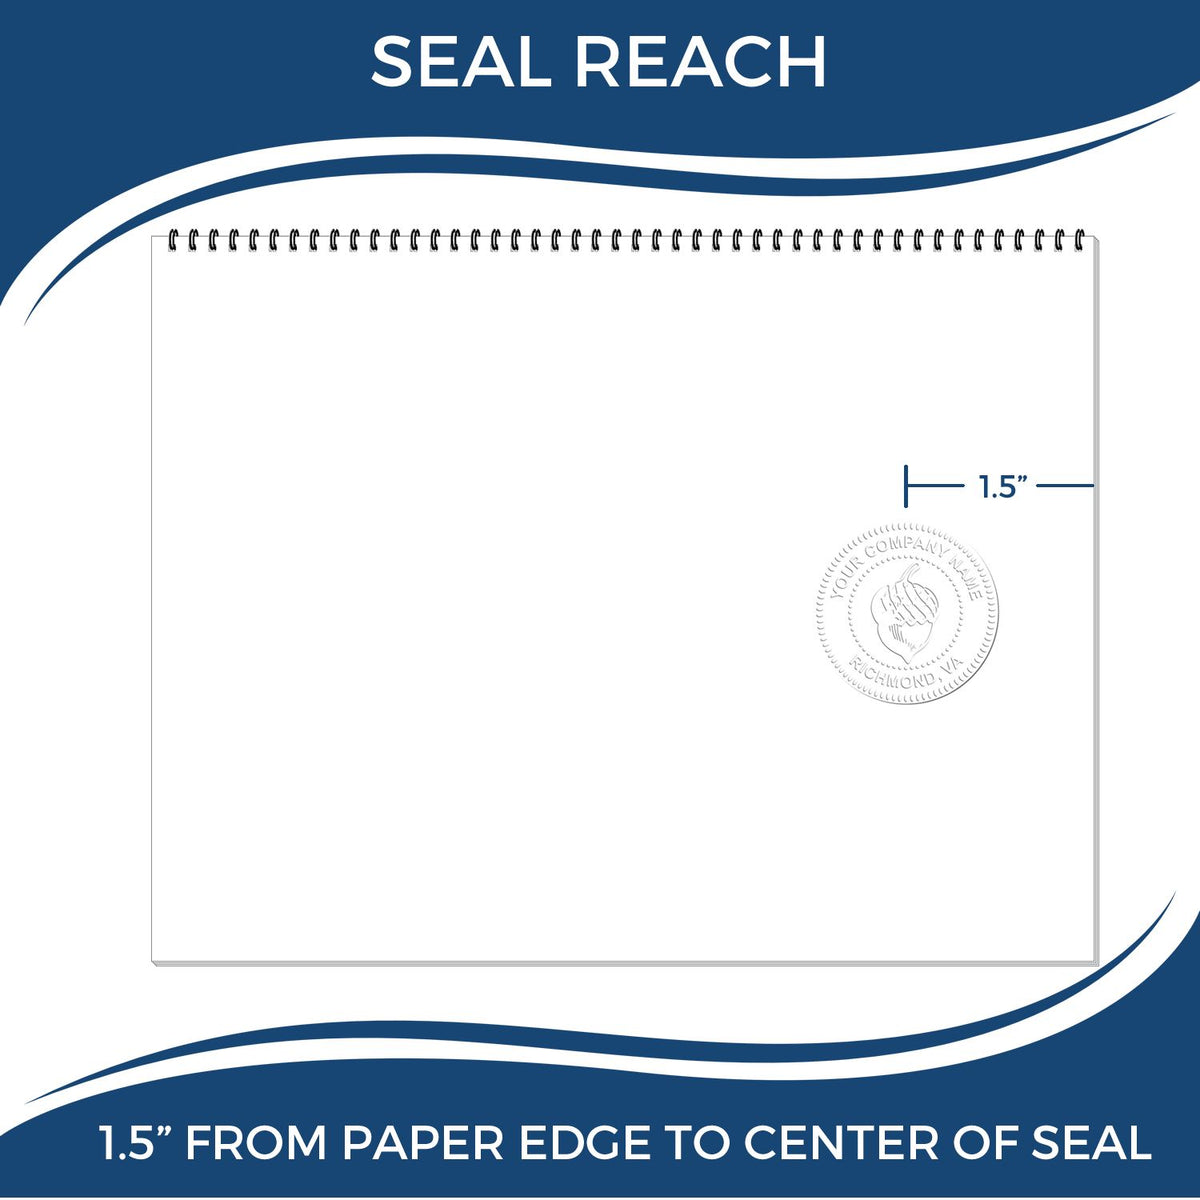 An infographic showing the seal reach which is represented by a ruler and a miniature seal image of the State of New Jersey Architectural Seal Embosser